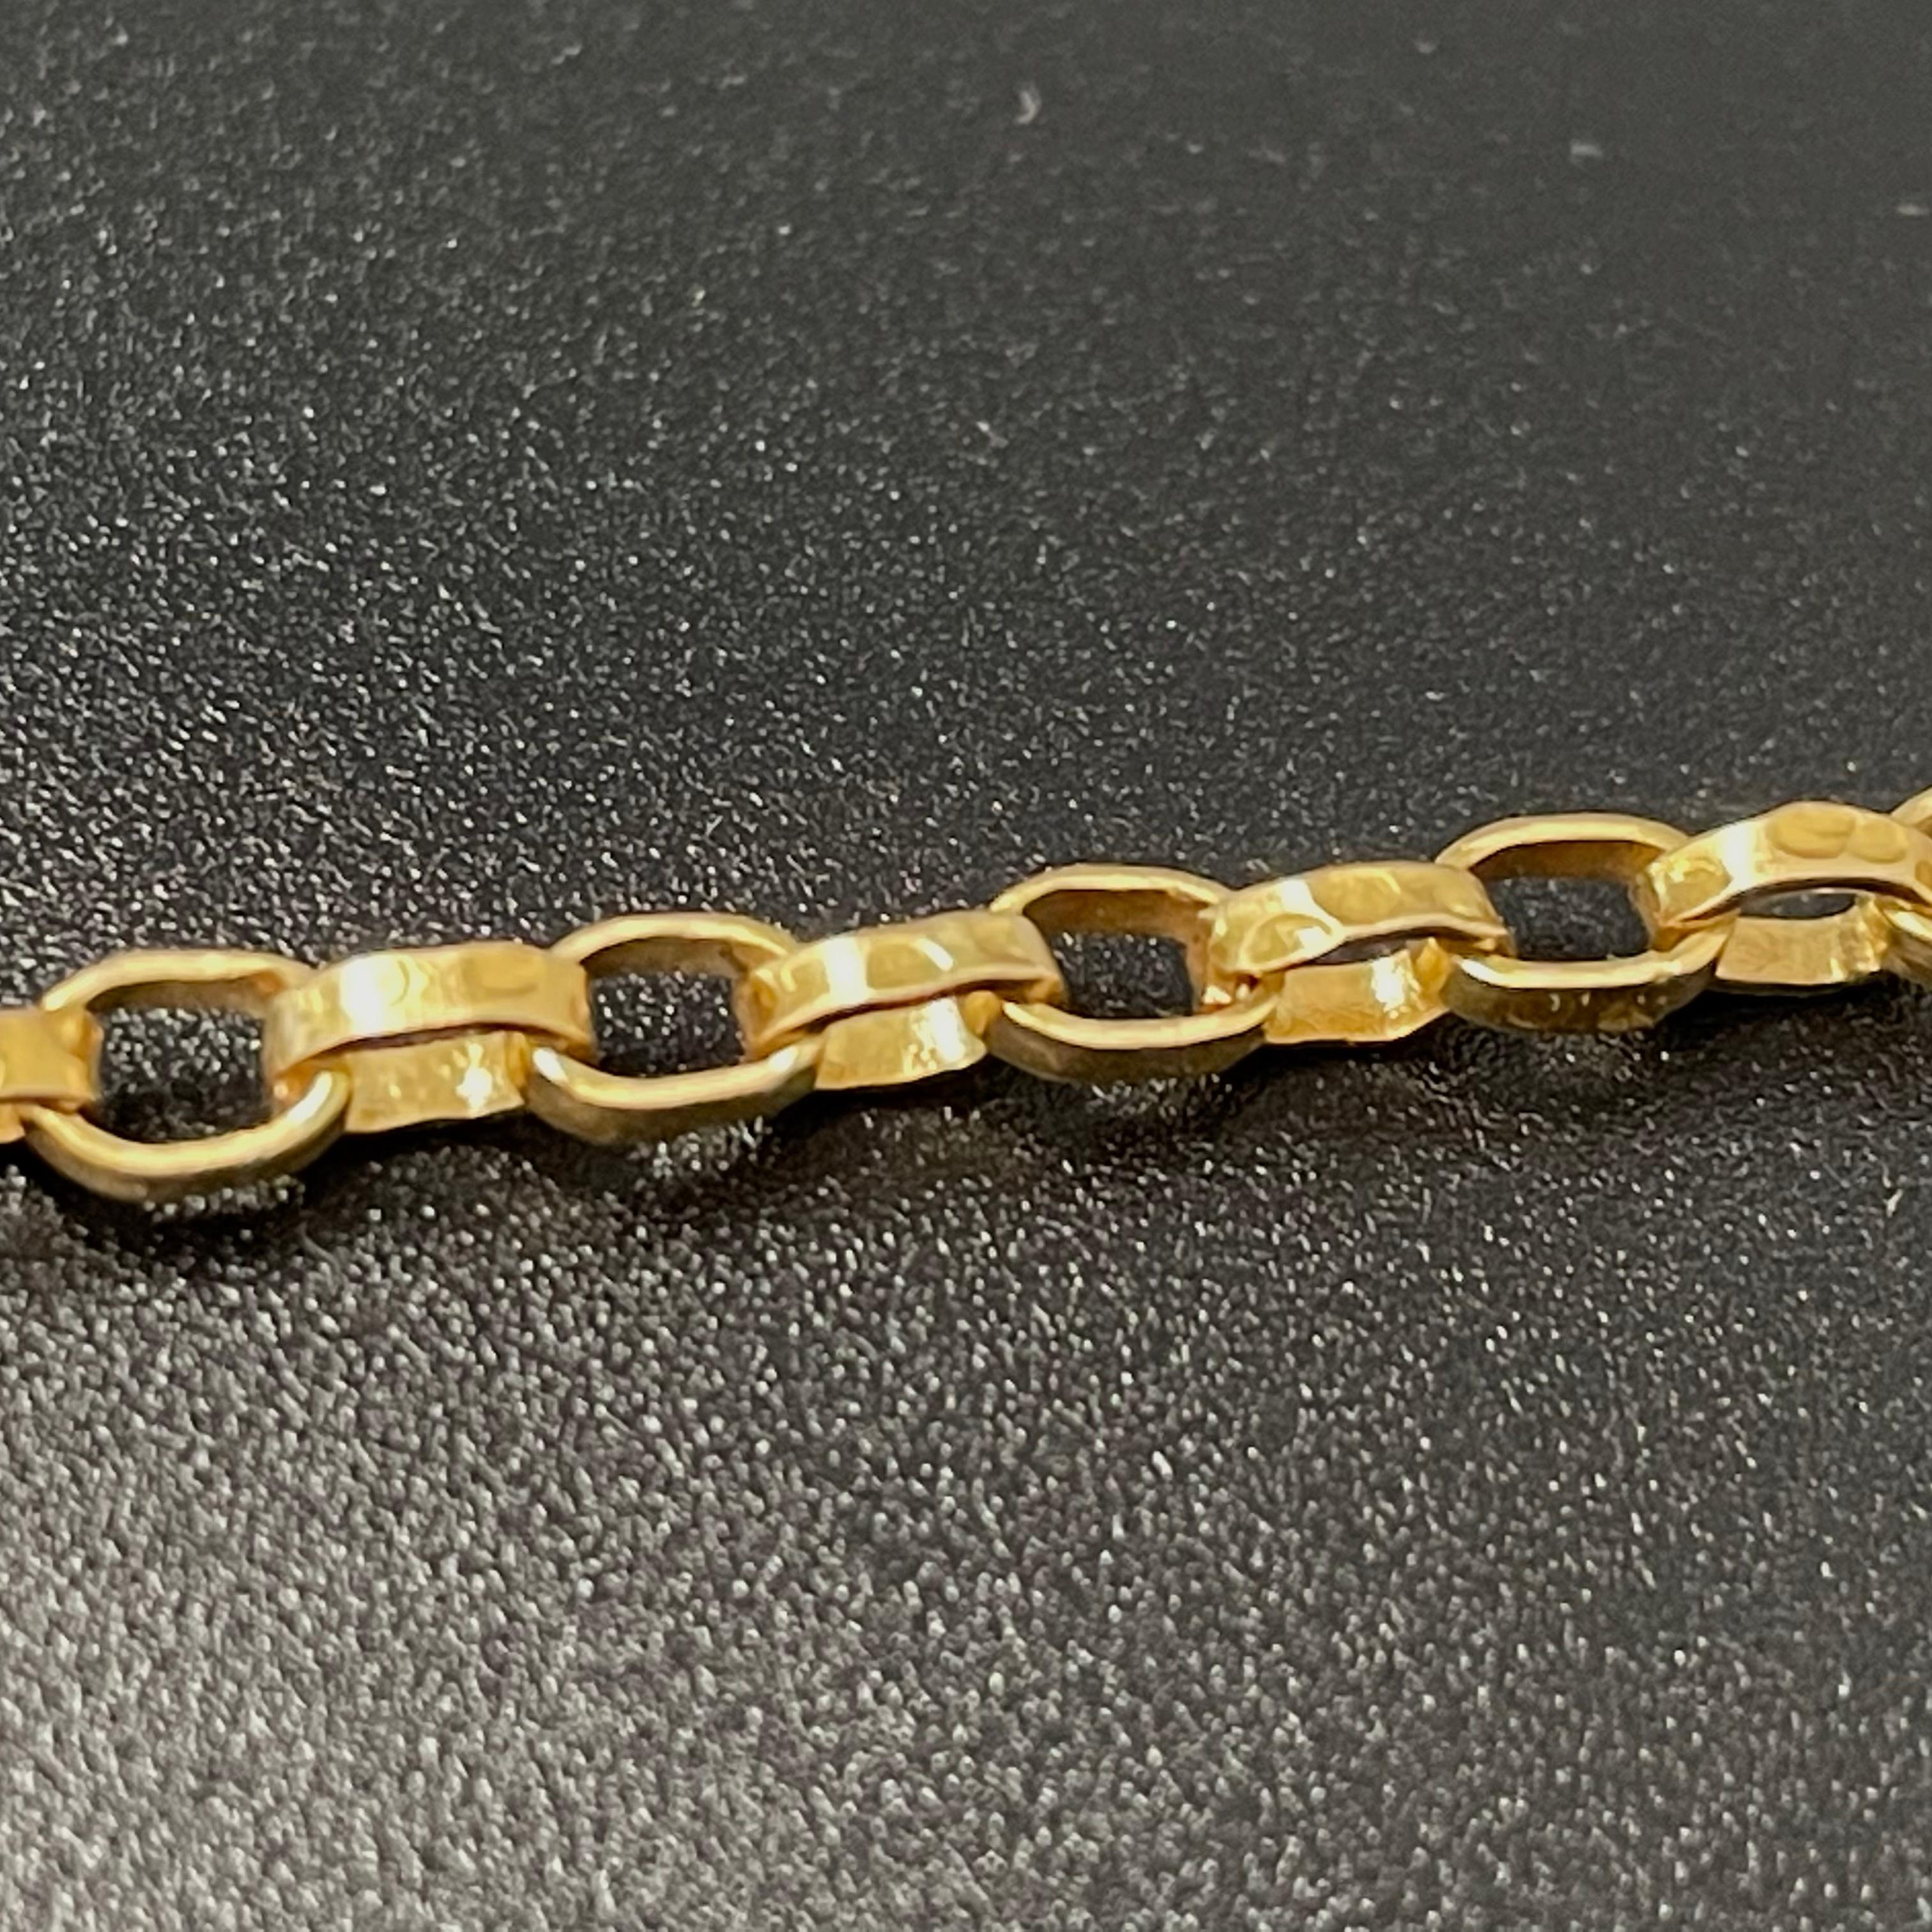 A unique handmade hammered organically textured chain with matt-finish provides a beautiful way to display your treasured pendants.  1.3 mm width.  Also available in 18 and 20 inch lengths. If you want one of those lengths, please message. Note*